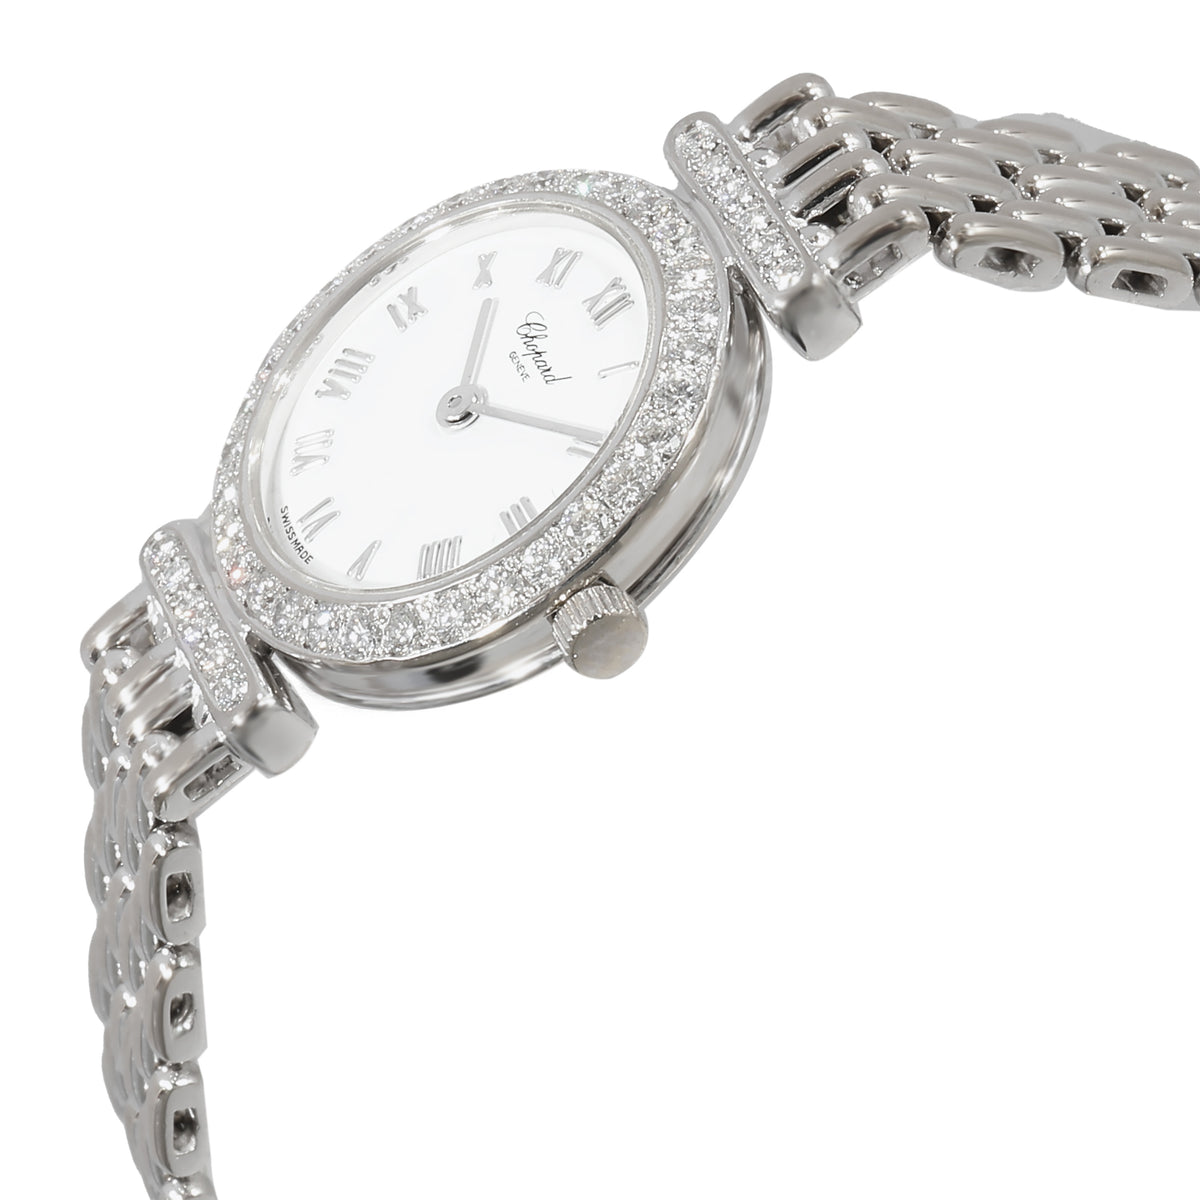 Classic 105895-1001 Women's Watch in 18kt White Gold